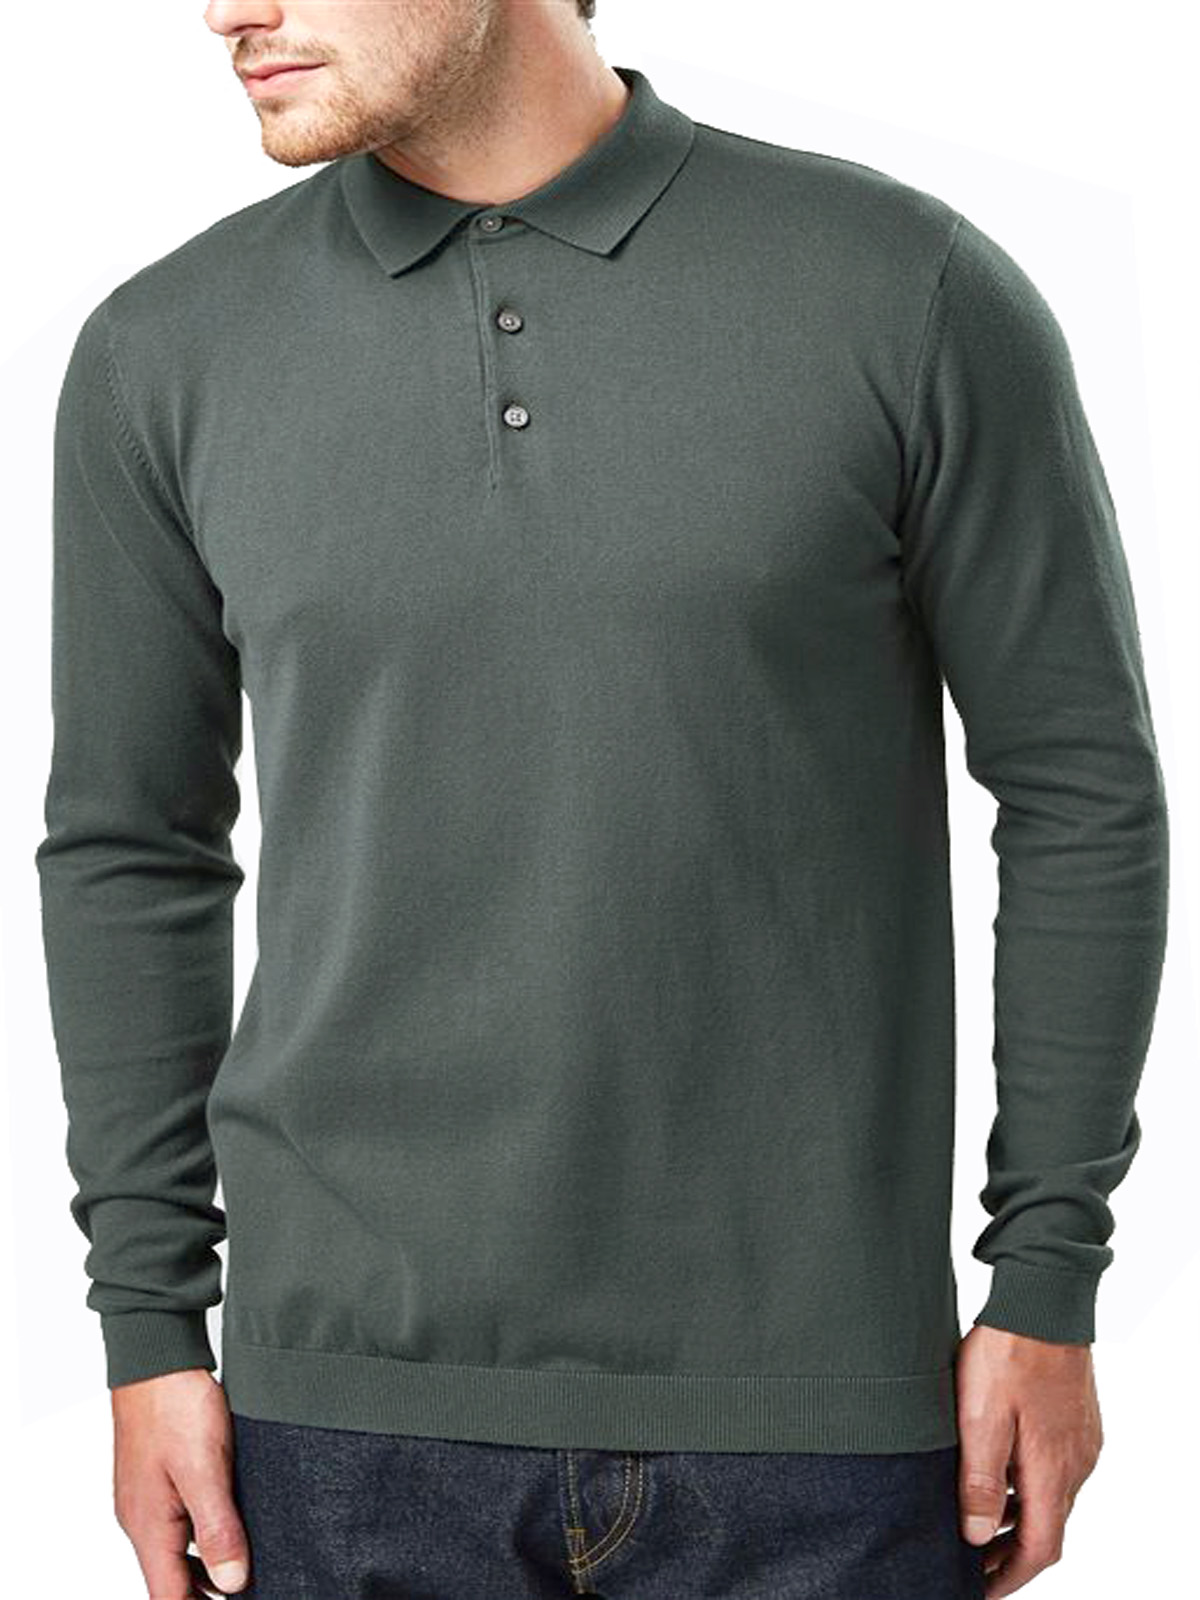 N3XT OLIVE Mens Cotton Rich Long Sleeve Polo Shirt - Size Large